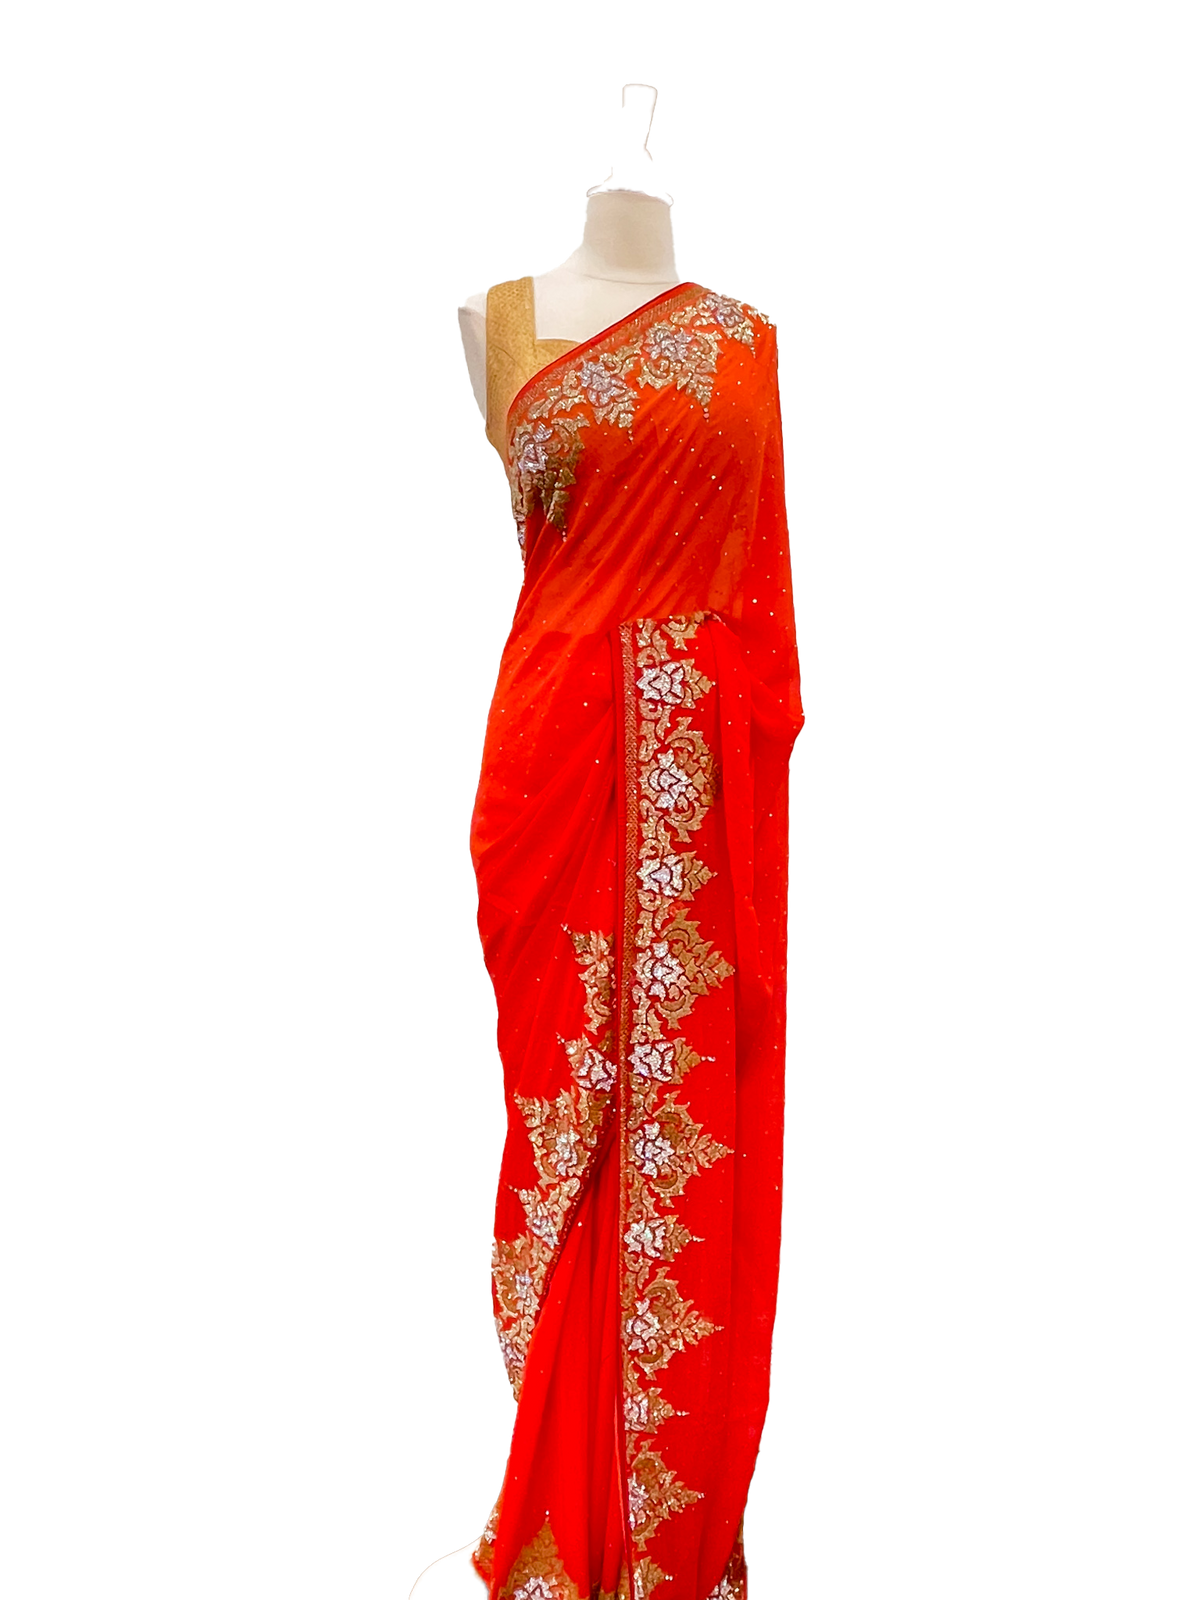 Red Georgette Saree with Gold and Silver Border